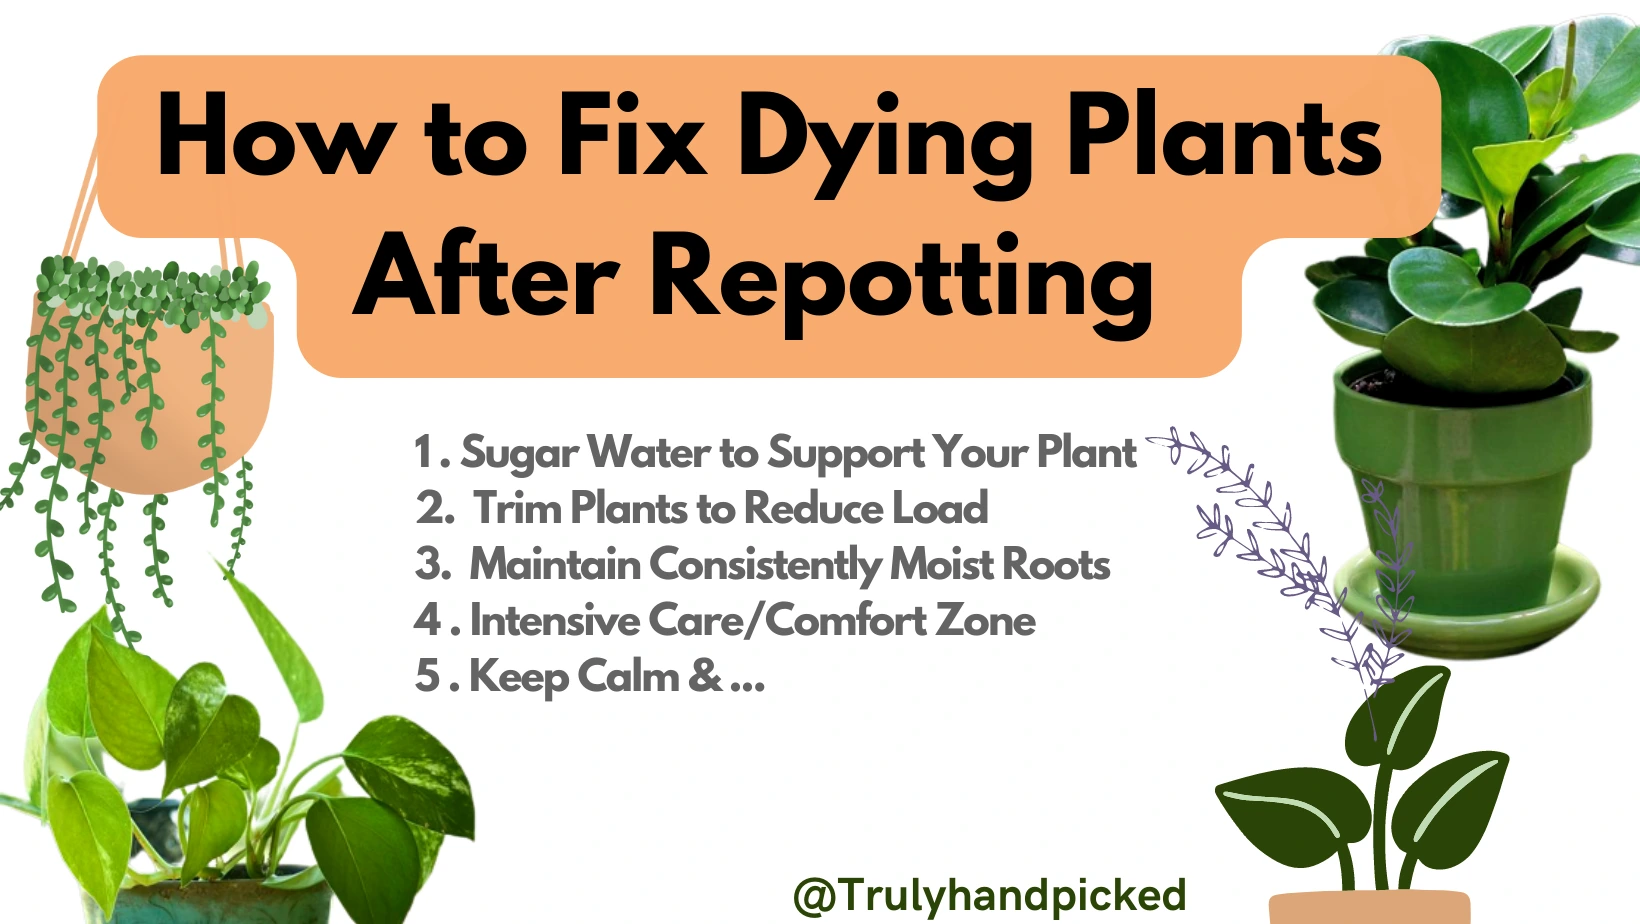 How to Fix Dying Plants after Repotting